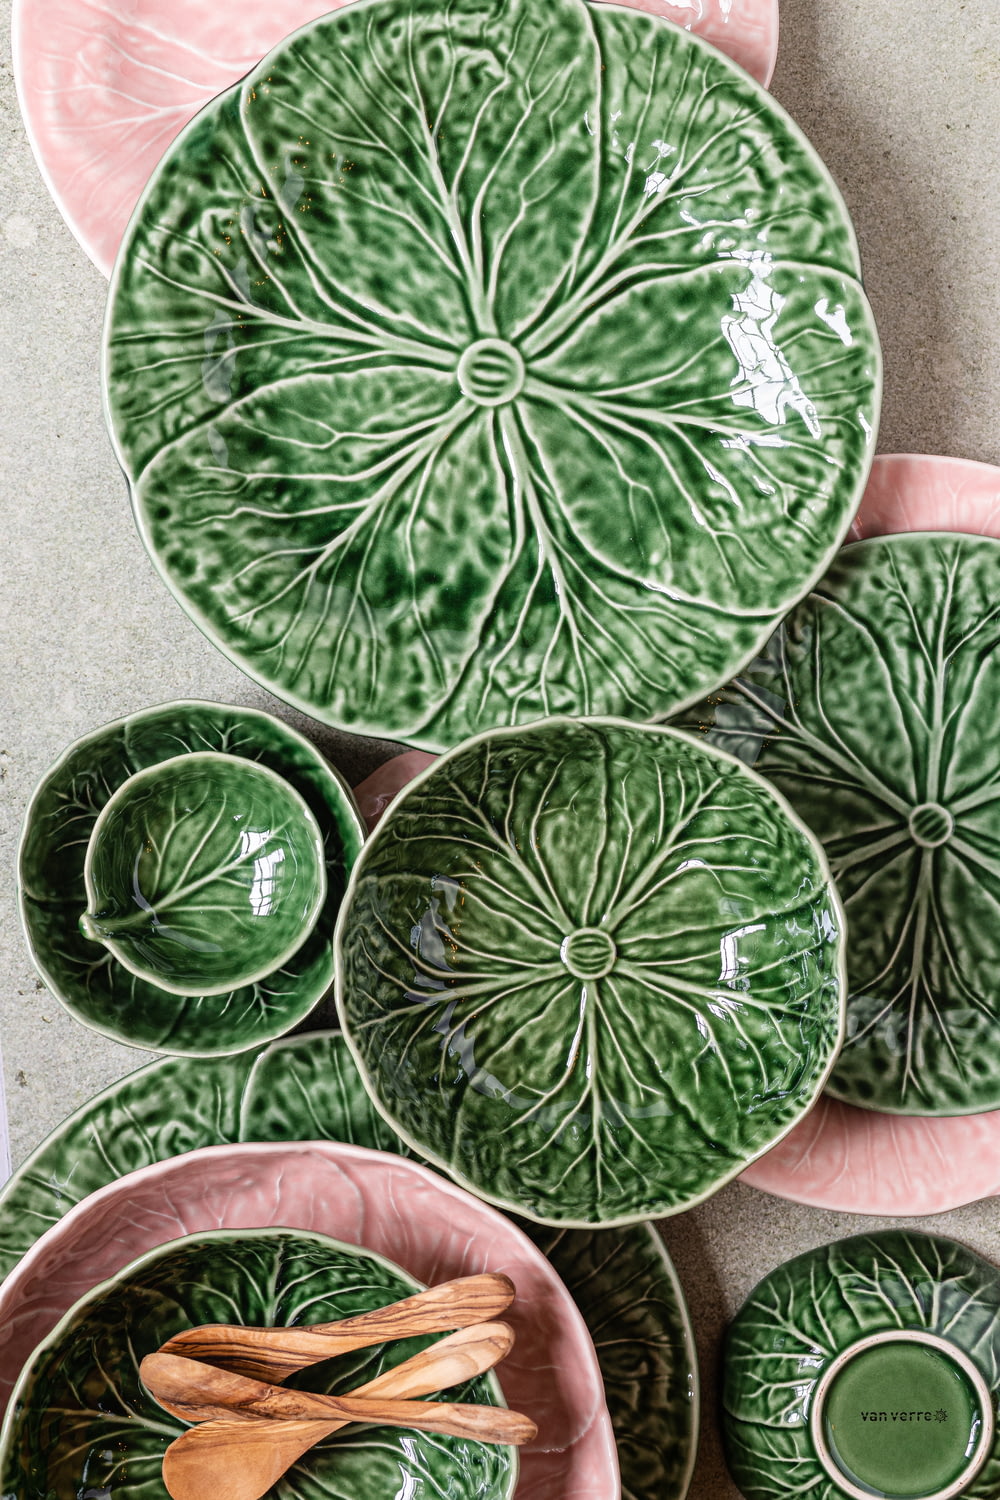 a collection of green and pink plates and bowls